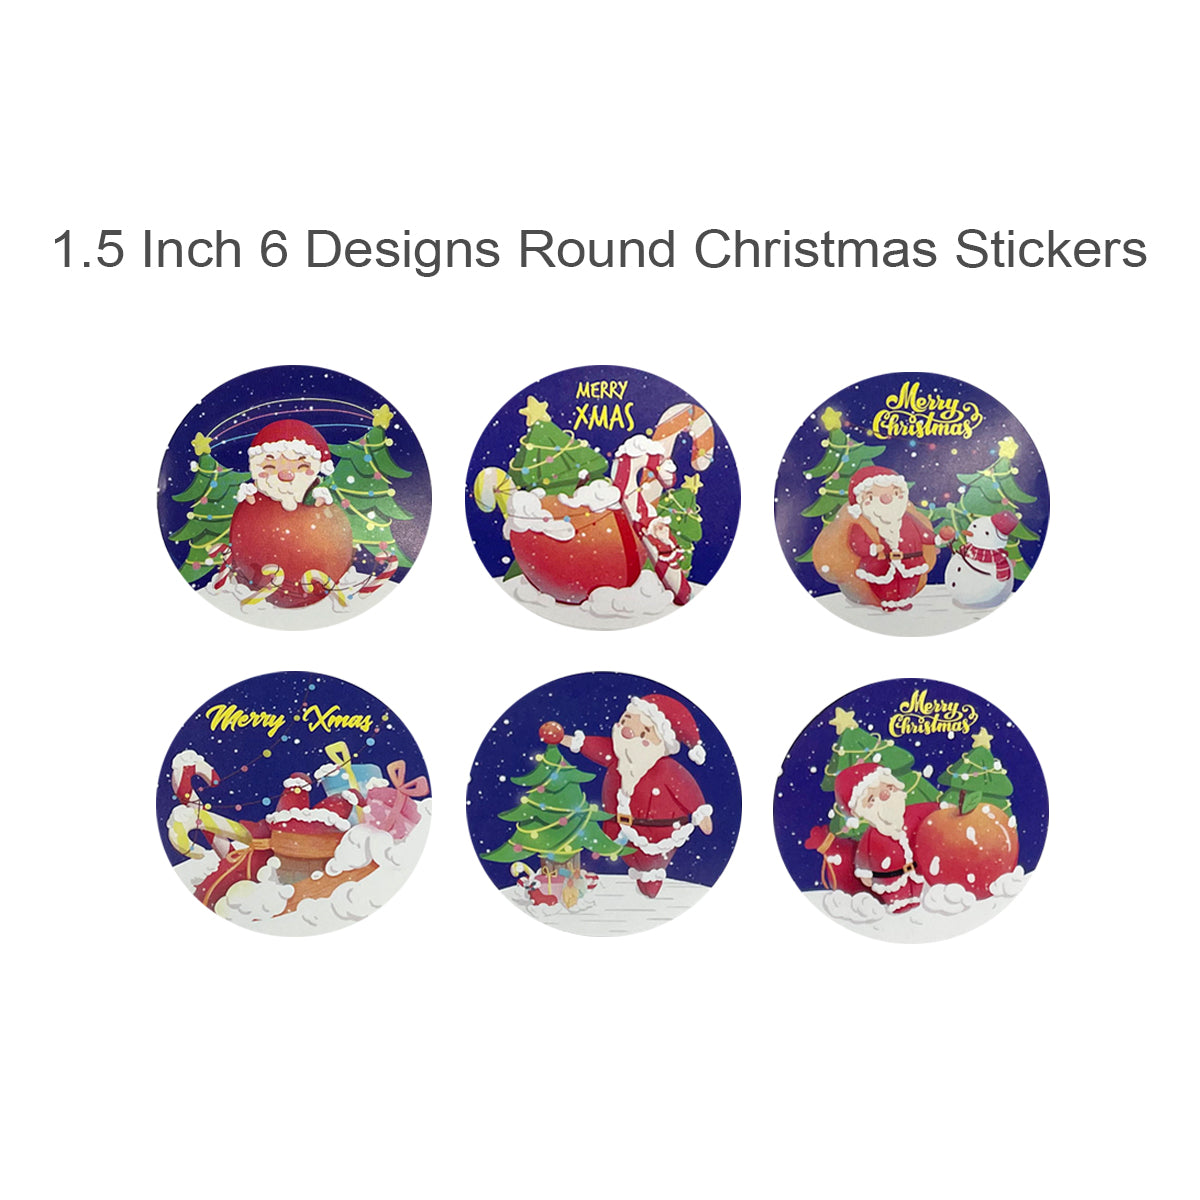 Wrapables Christmas Stickers Label Roll, Holiday Stickers for Sealing Cards, Envelopes, Gift Boxes, Festive Party Favors (500 pcs)